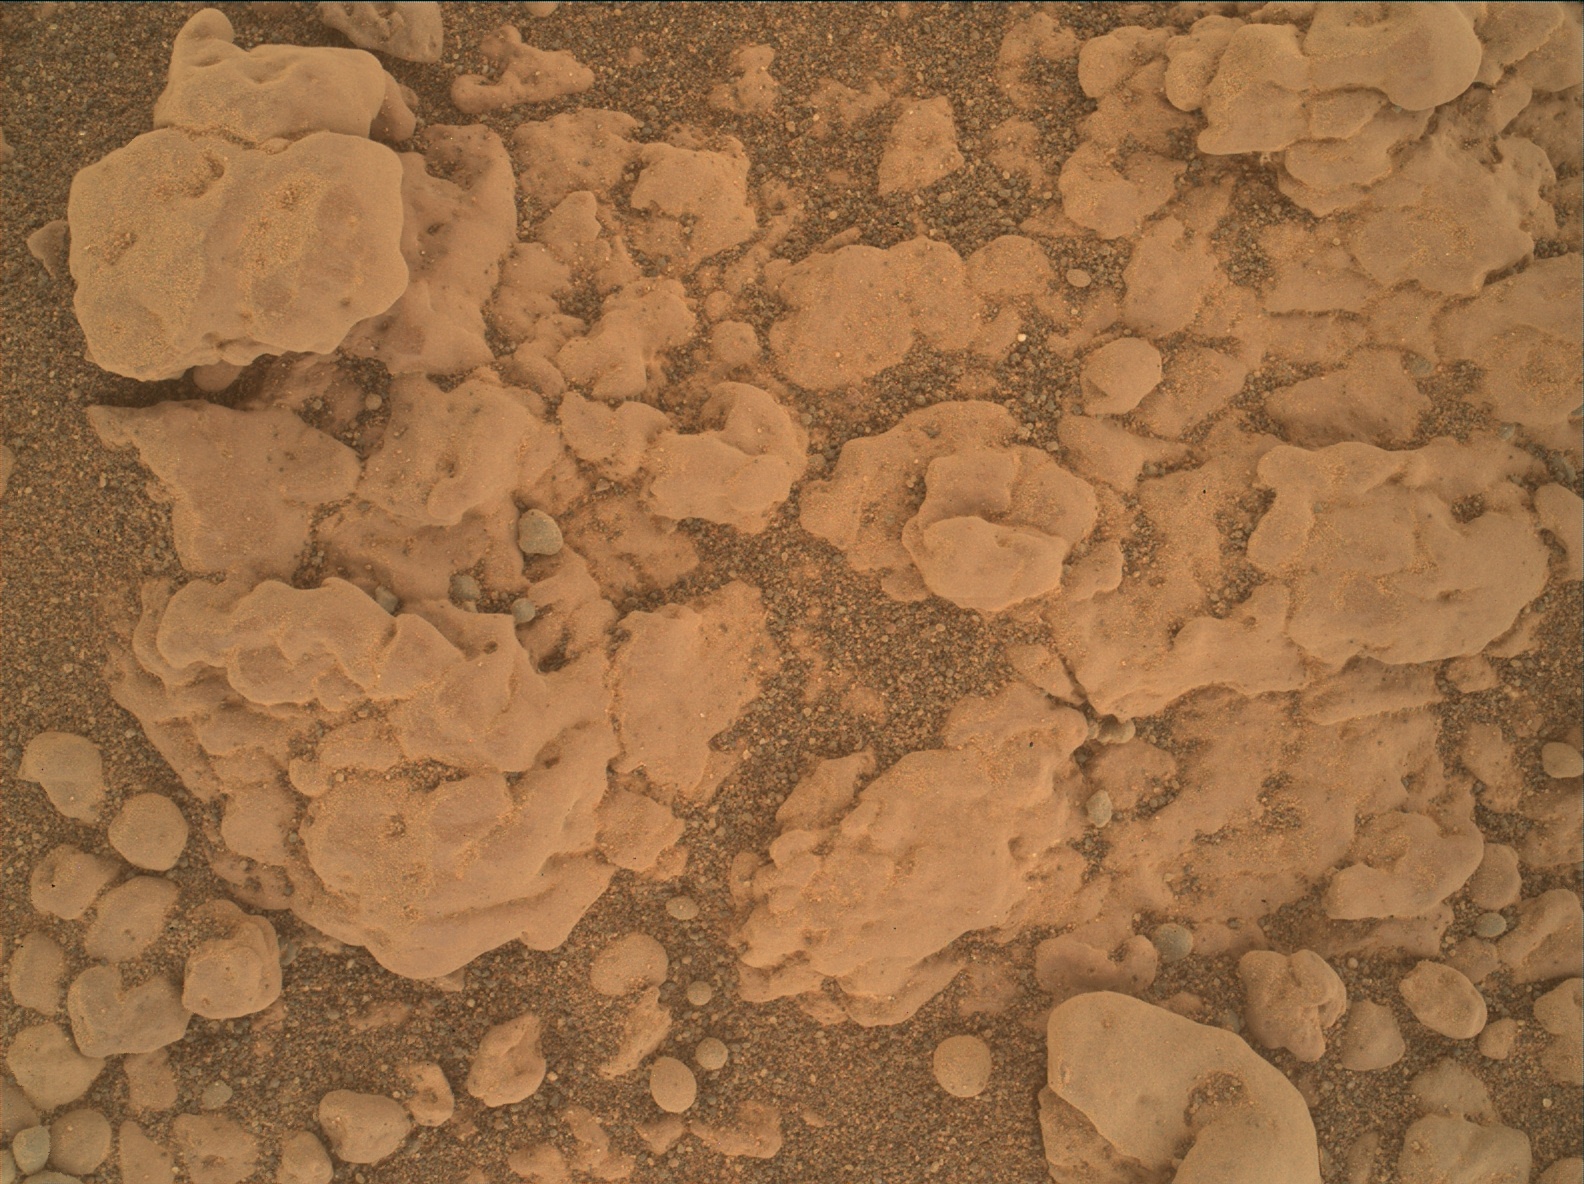 Nasa's Mars rover Curiosity acquired this image using its Mars Hand Lens Imager (MAHLI) on Sol 2311